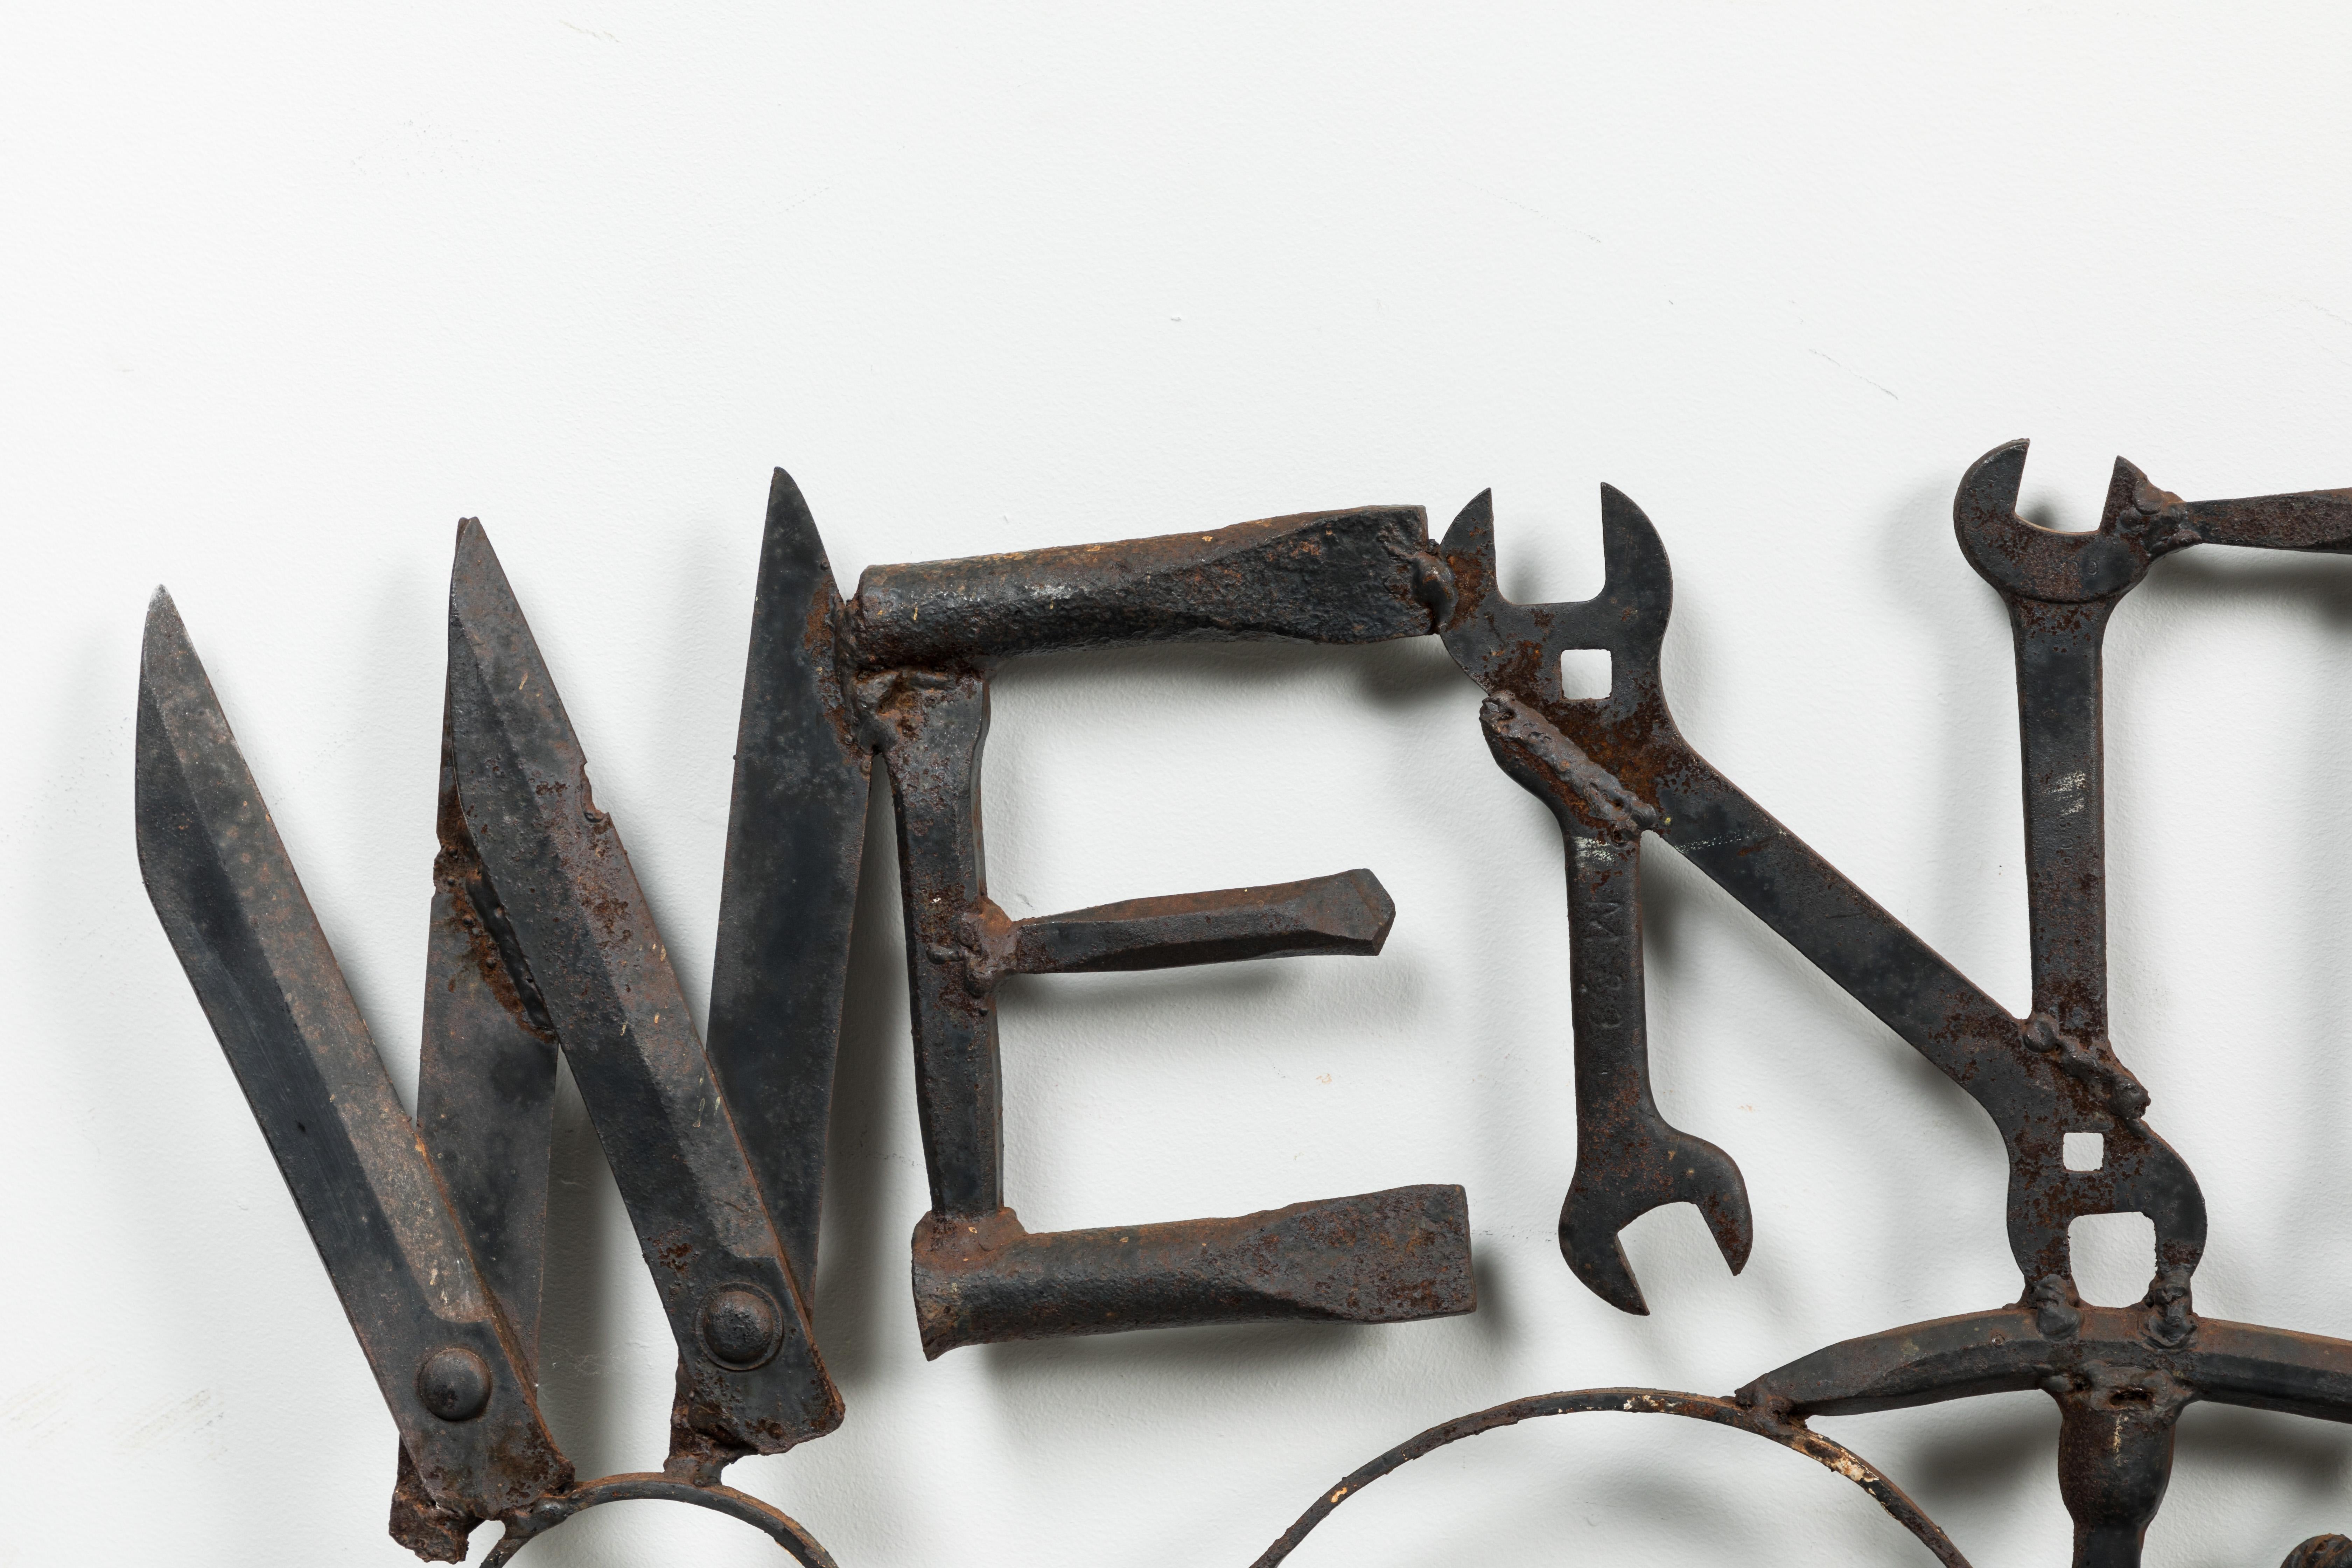 Wentworth Tool Museum sign assembled with scrap tools and hardware. Assemblage include many wrenches, drill bits, saws and scissors. Heavy iron construction. Great piece of American outsider art found in the midwestern United States. Thought to be